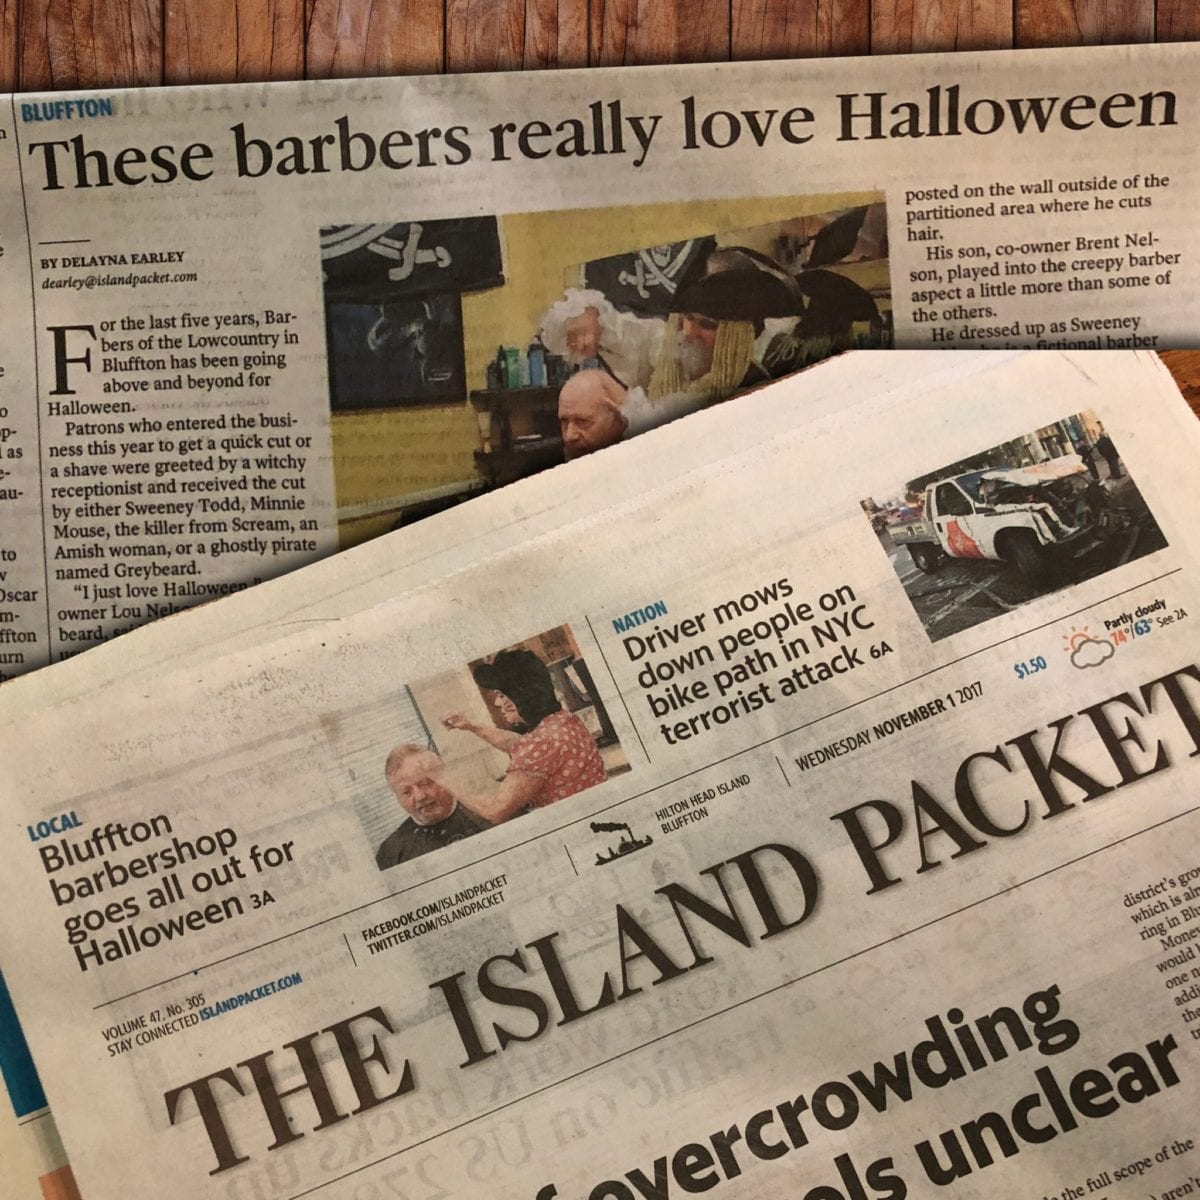 The front page of The Island Packet newspaper displays a photo and headline featuring Barbers of the Lowcountry